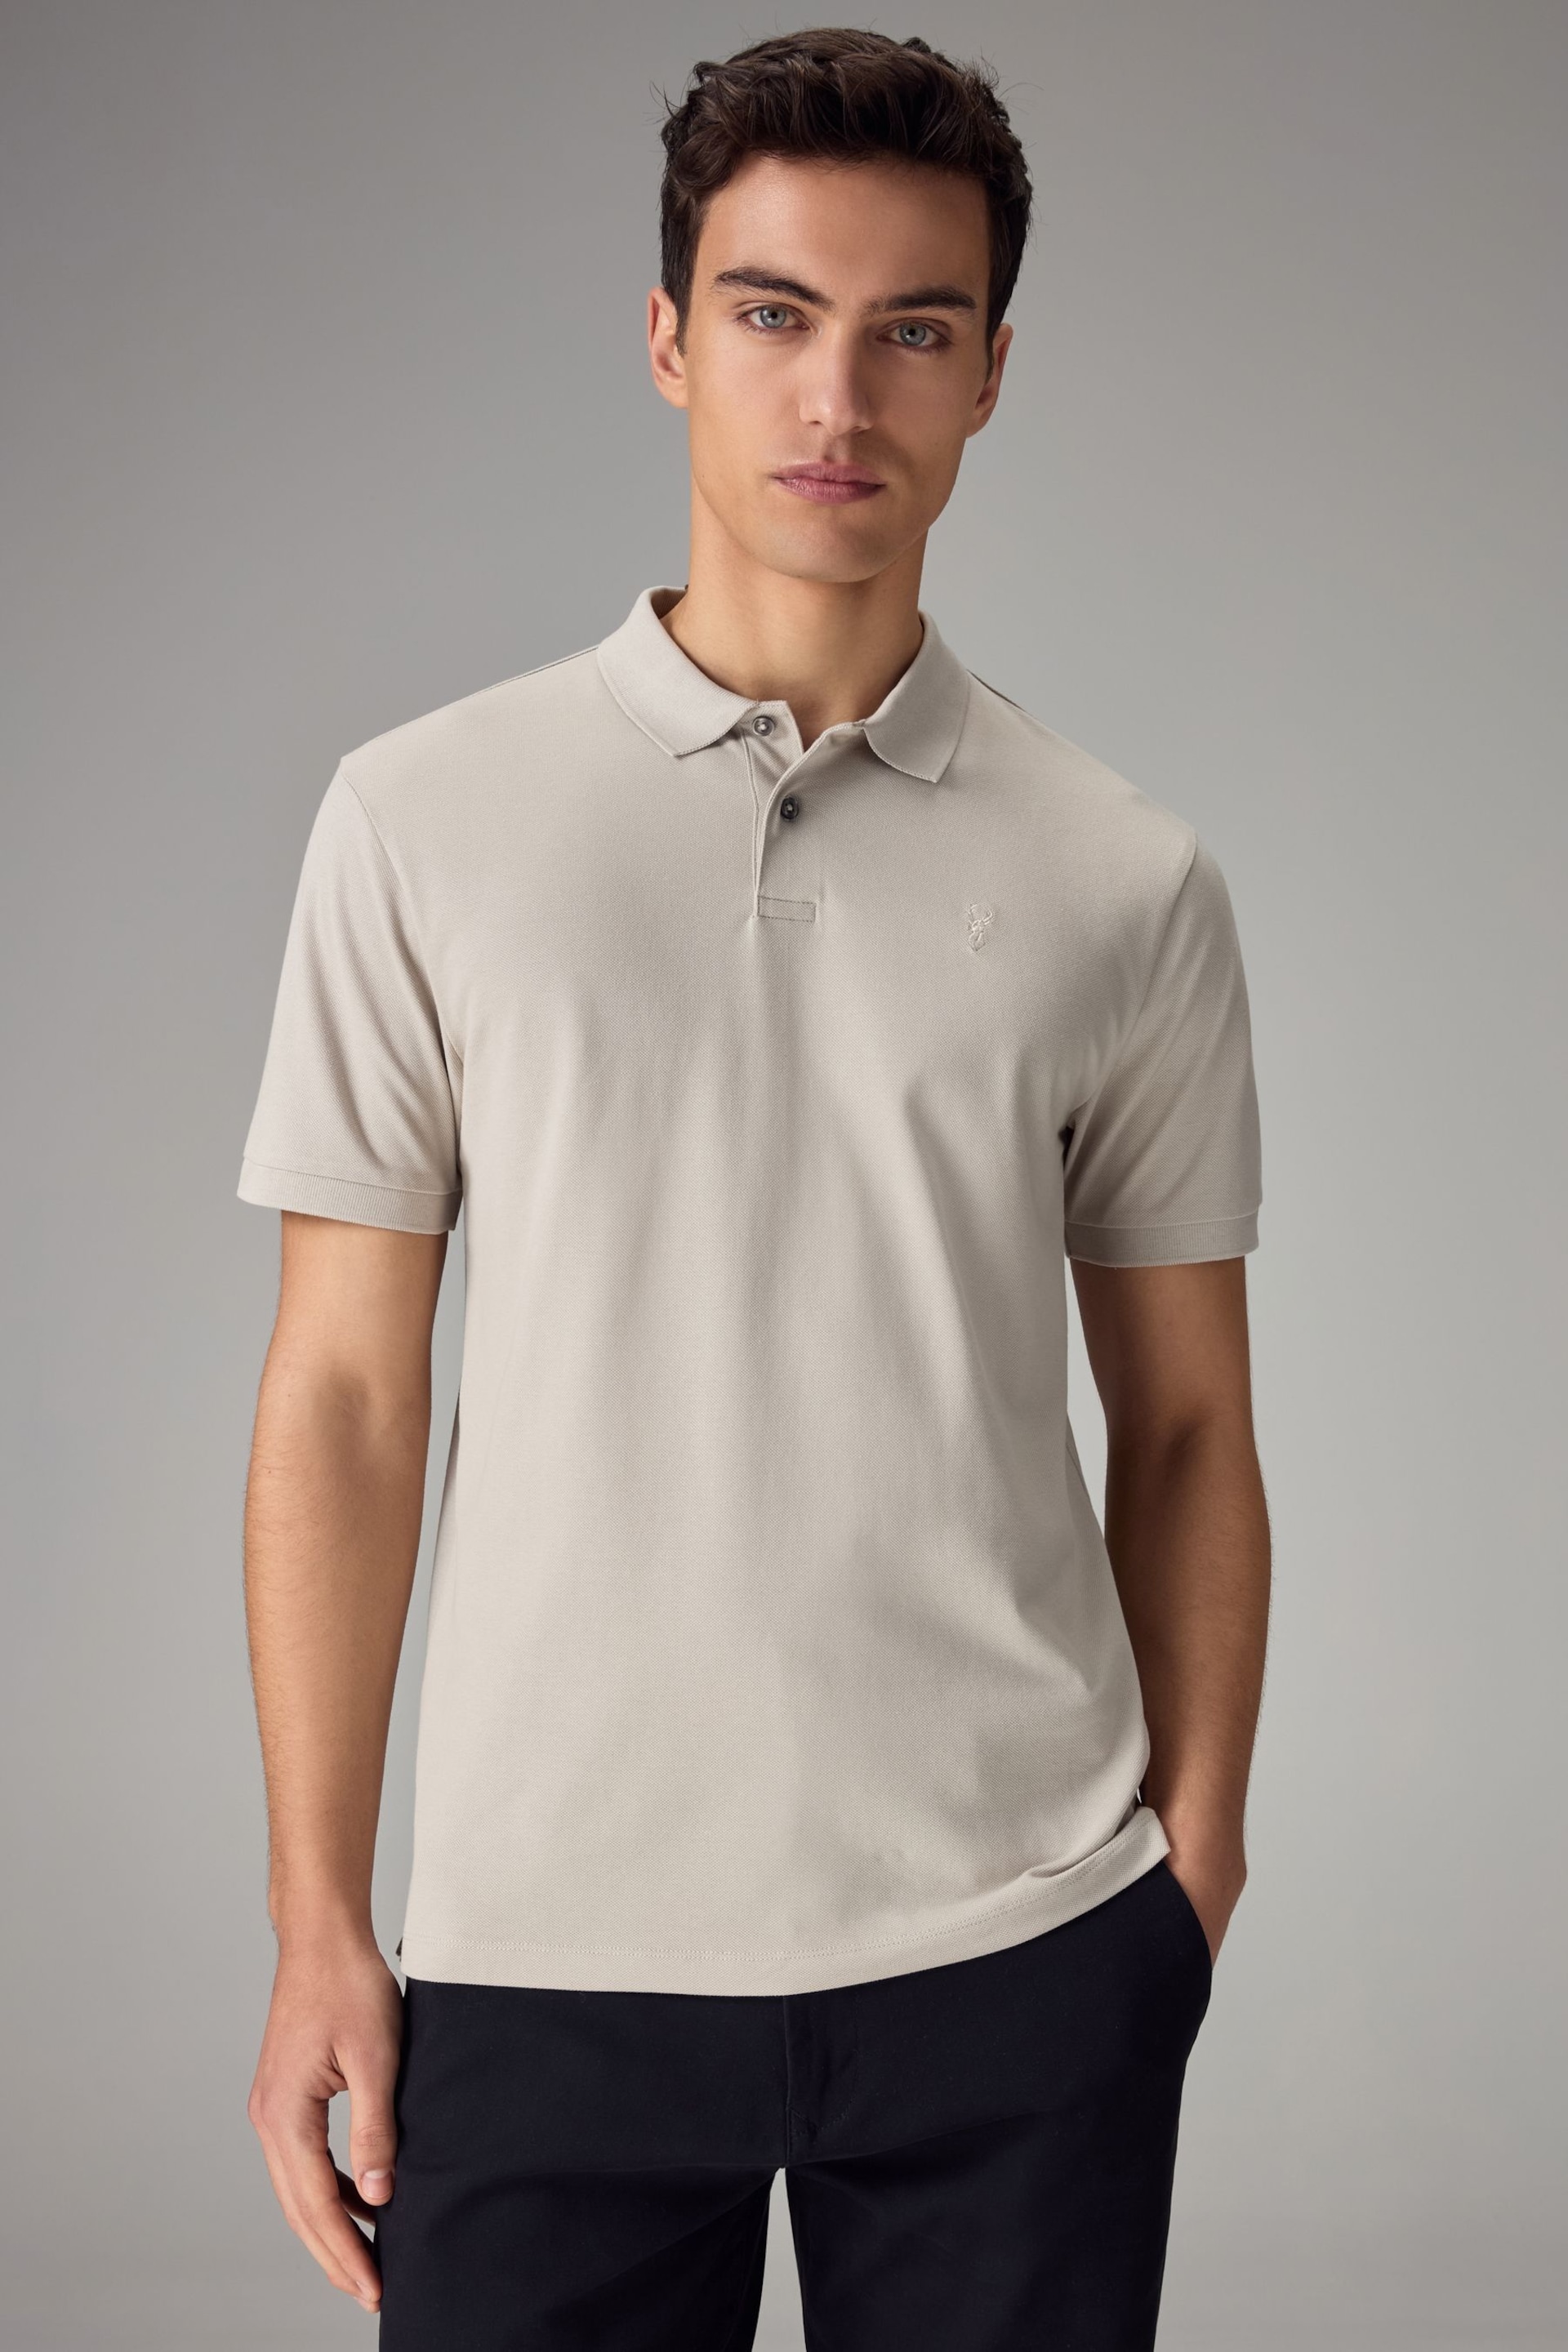 Neutral Slim Fit Short Sleeve Pique Polo Shirt - Image 1 of 5